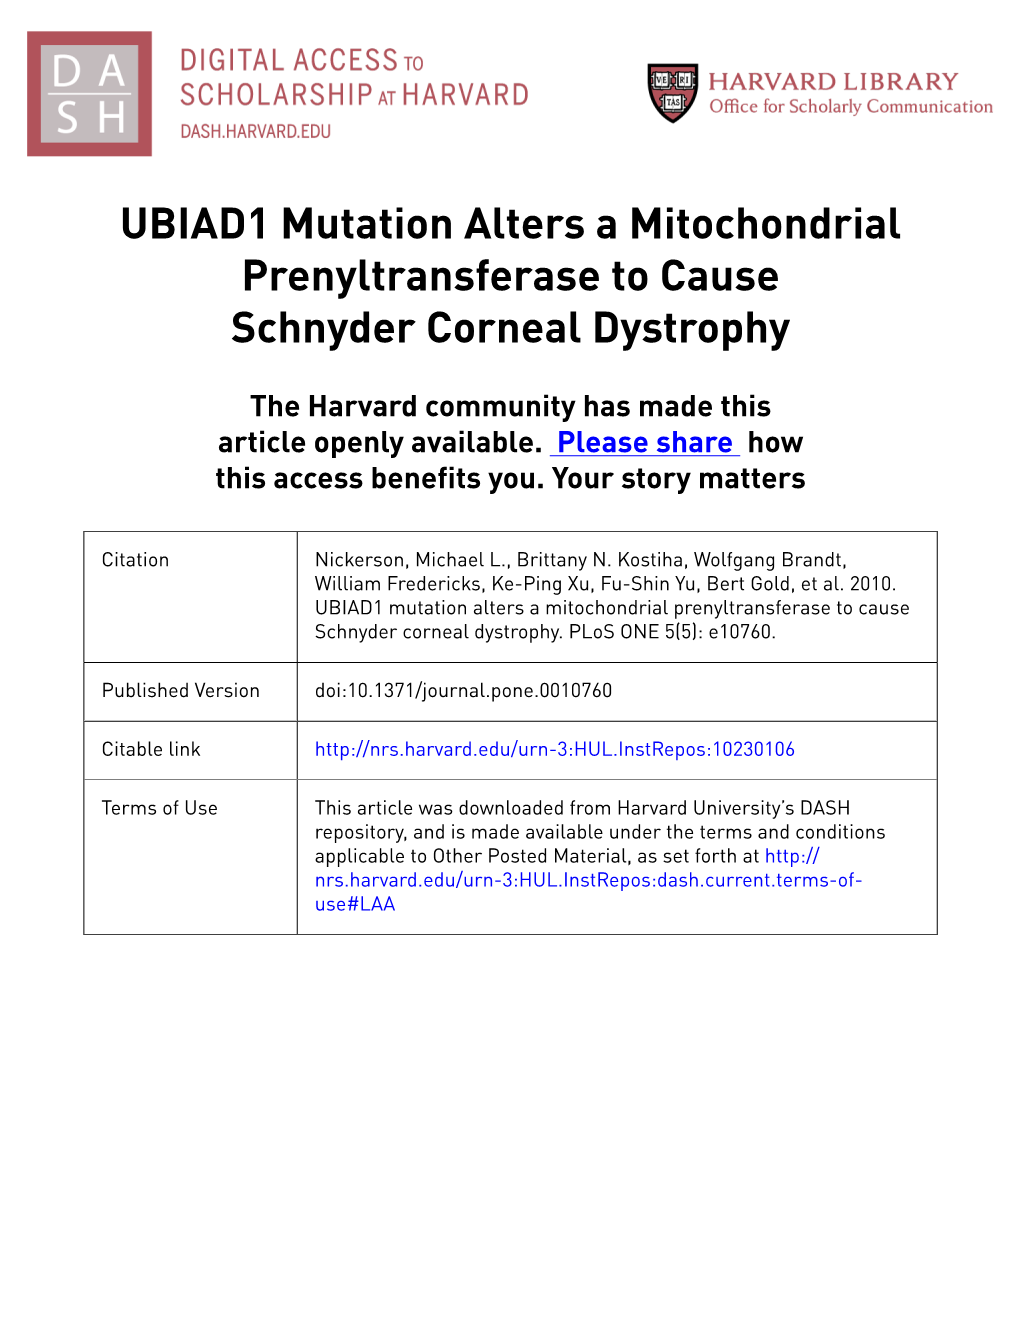 UBIAD1 Mutation Alters a Mitochondrial Prenyltransferase to Cause Schnyder Corneal Dystrophy